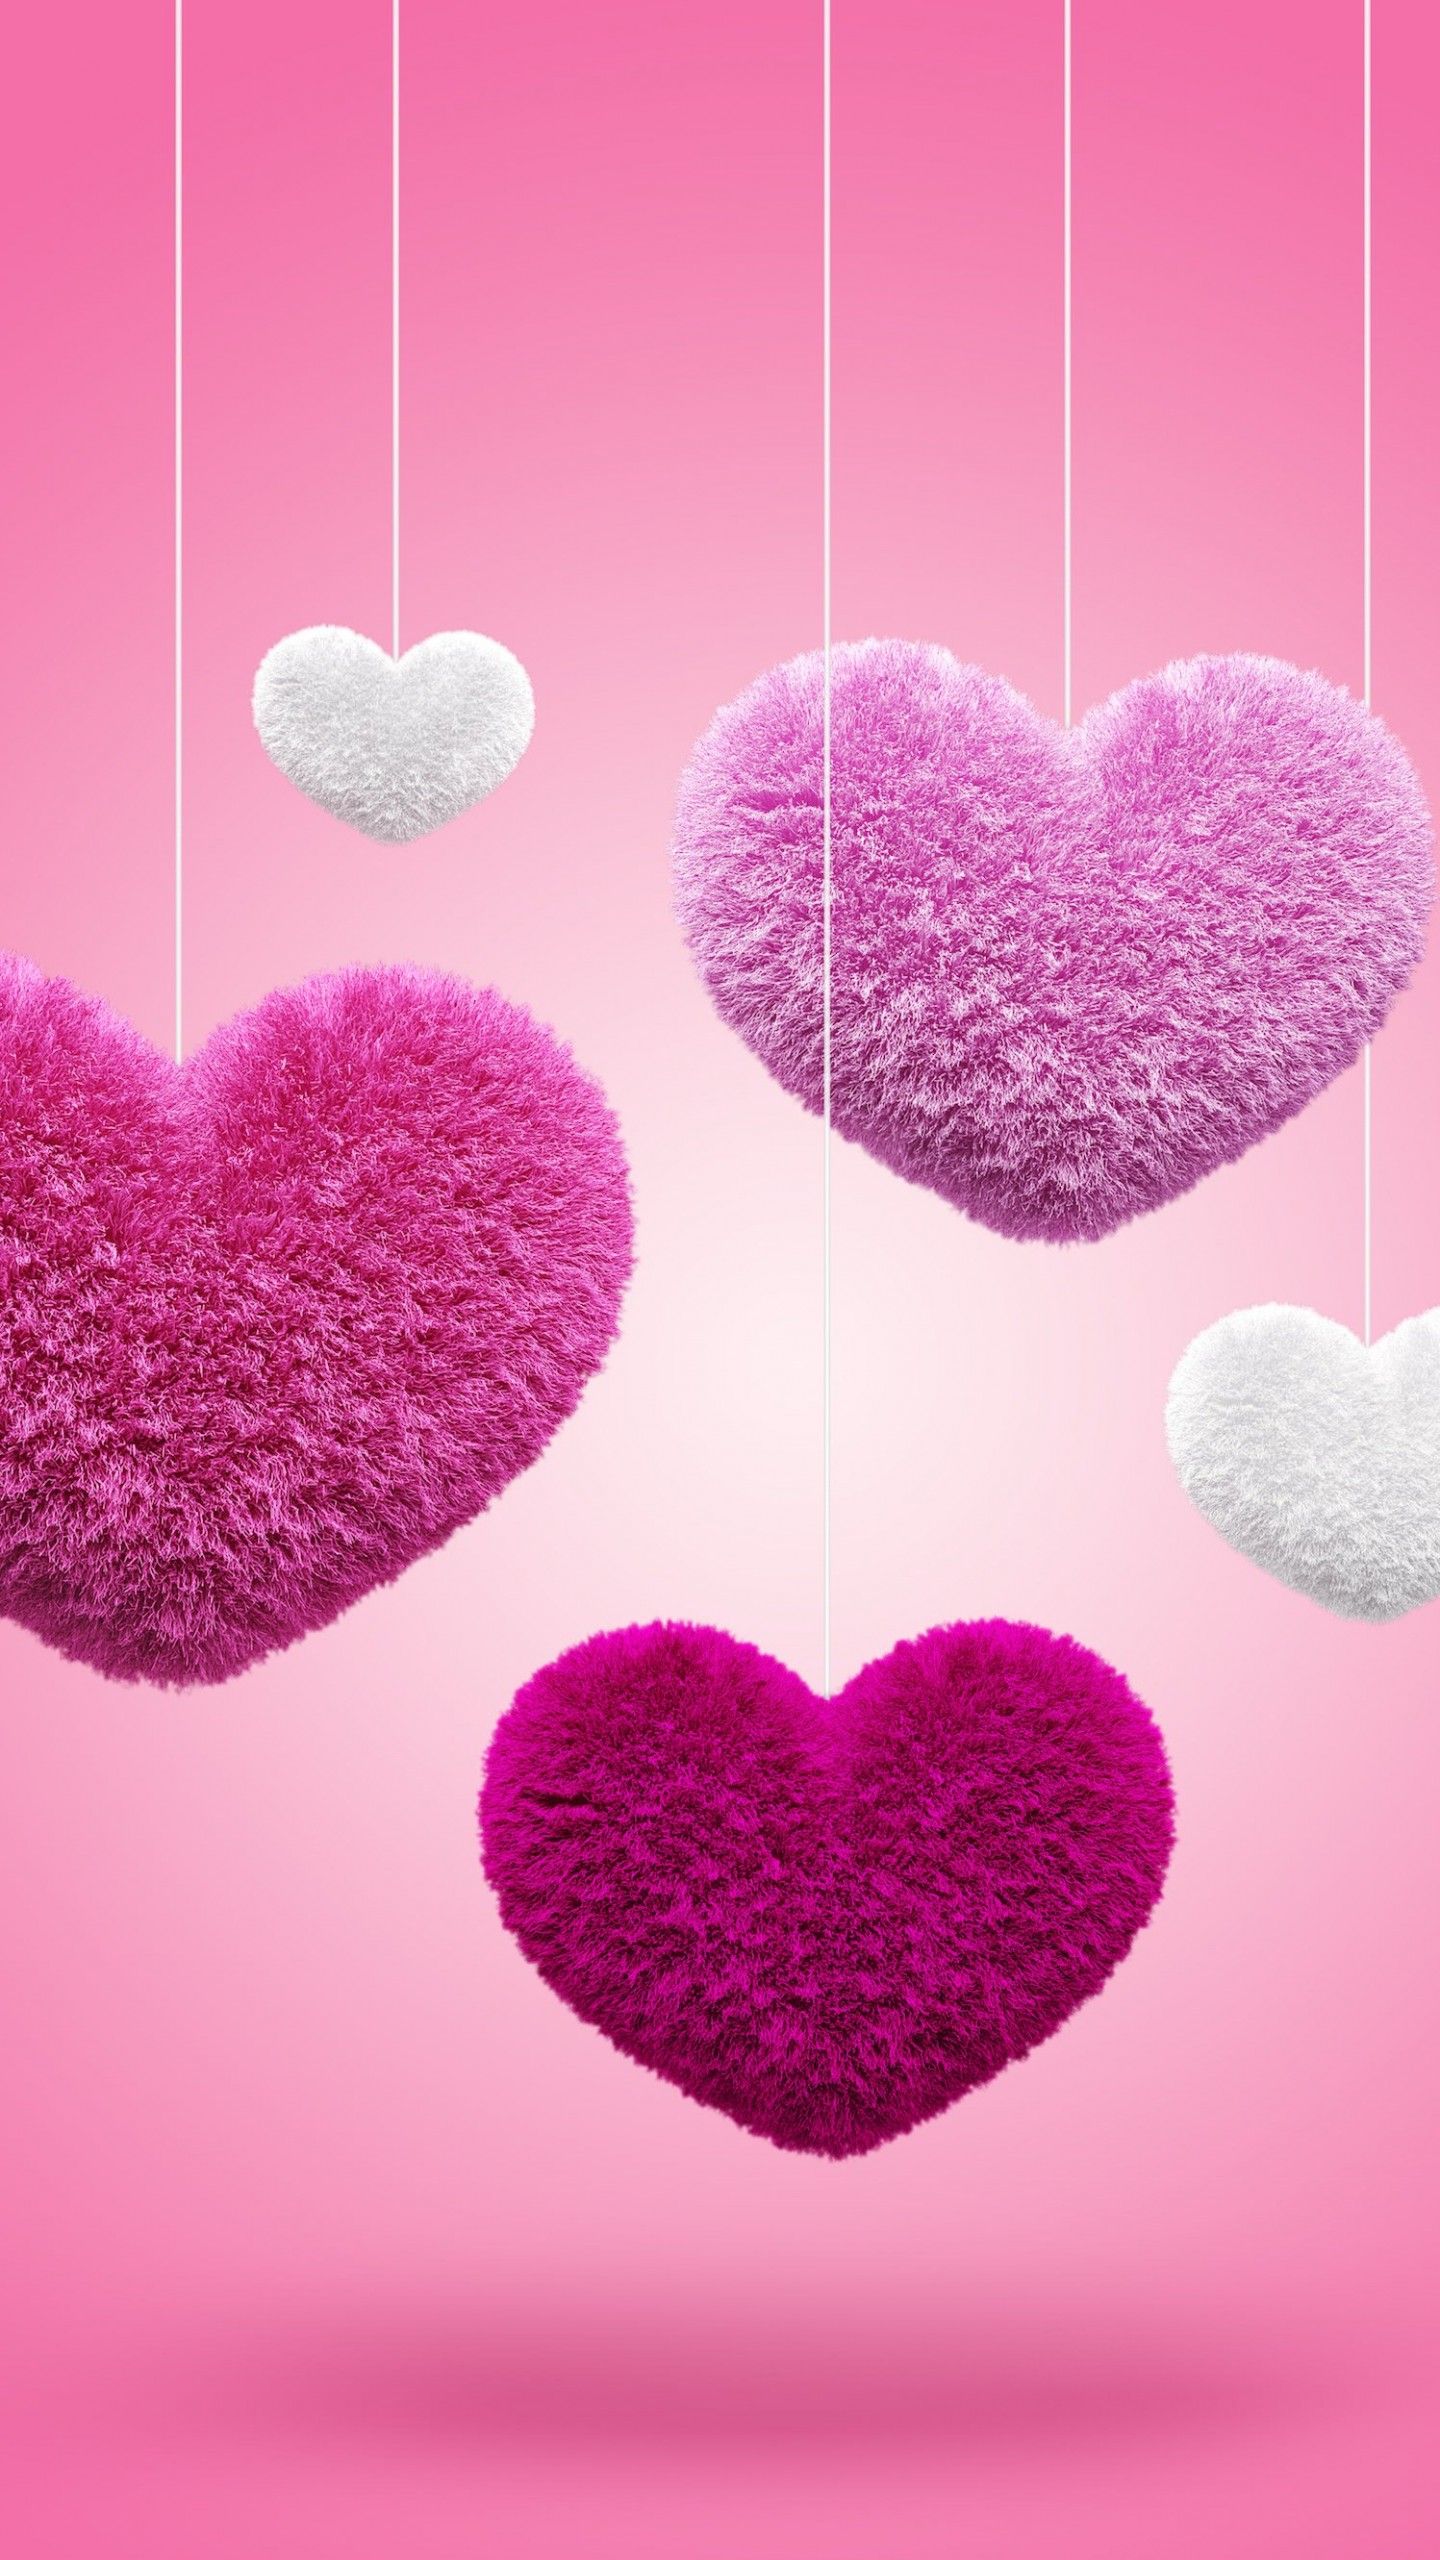 Fluffy Hearts Wallpaper for SAMSUNG Galaxy Note 4